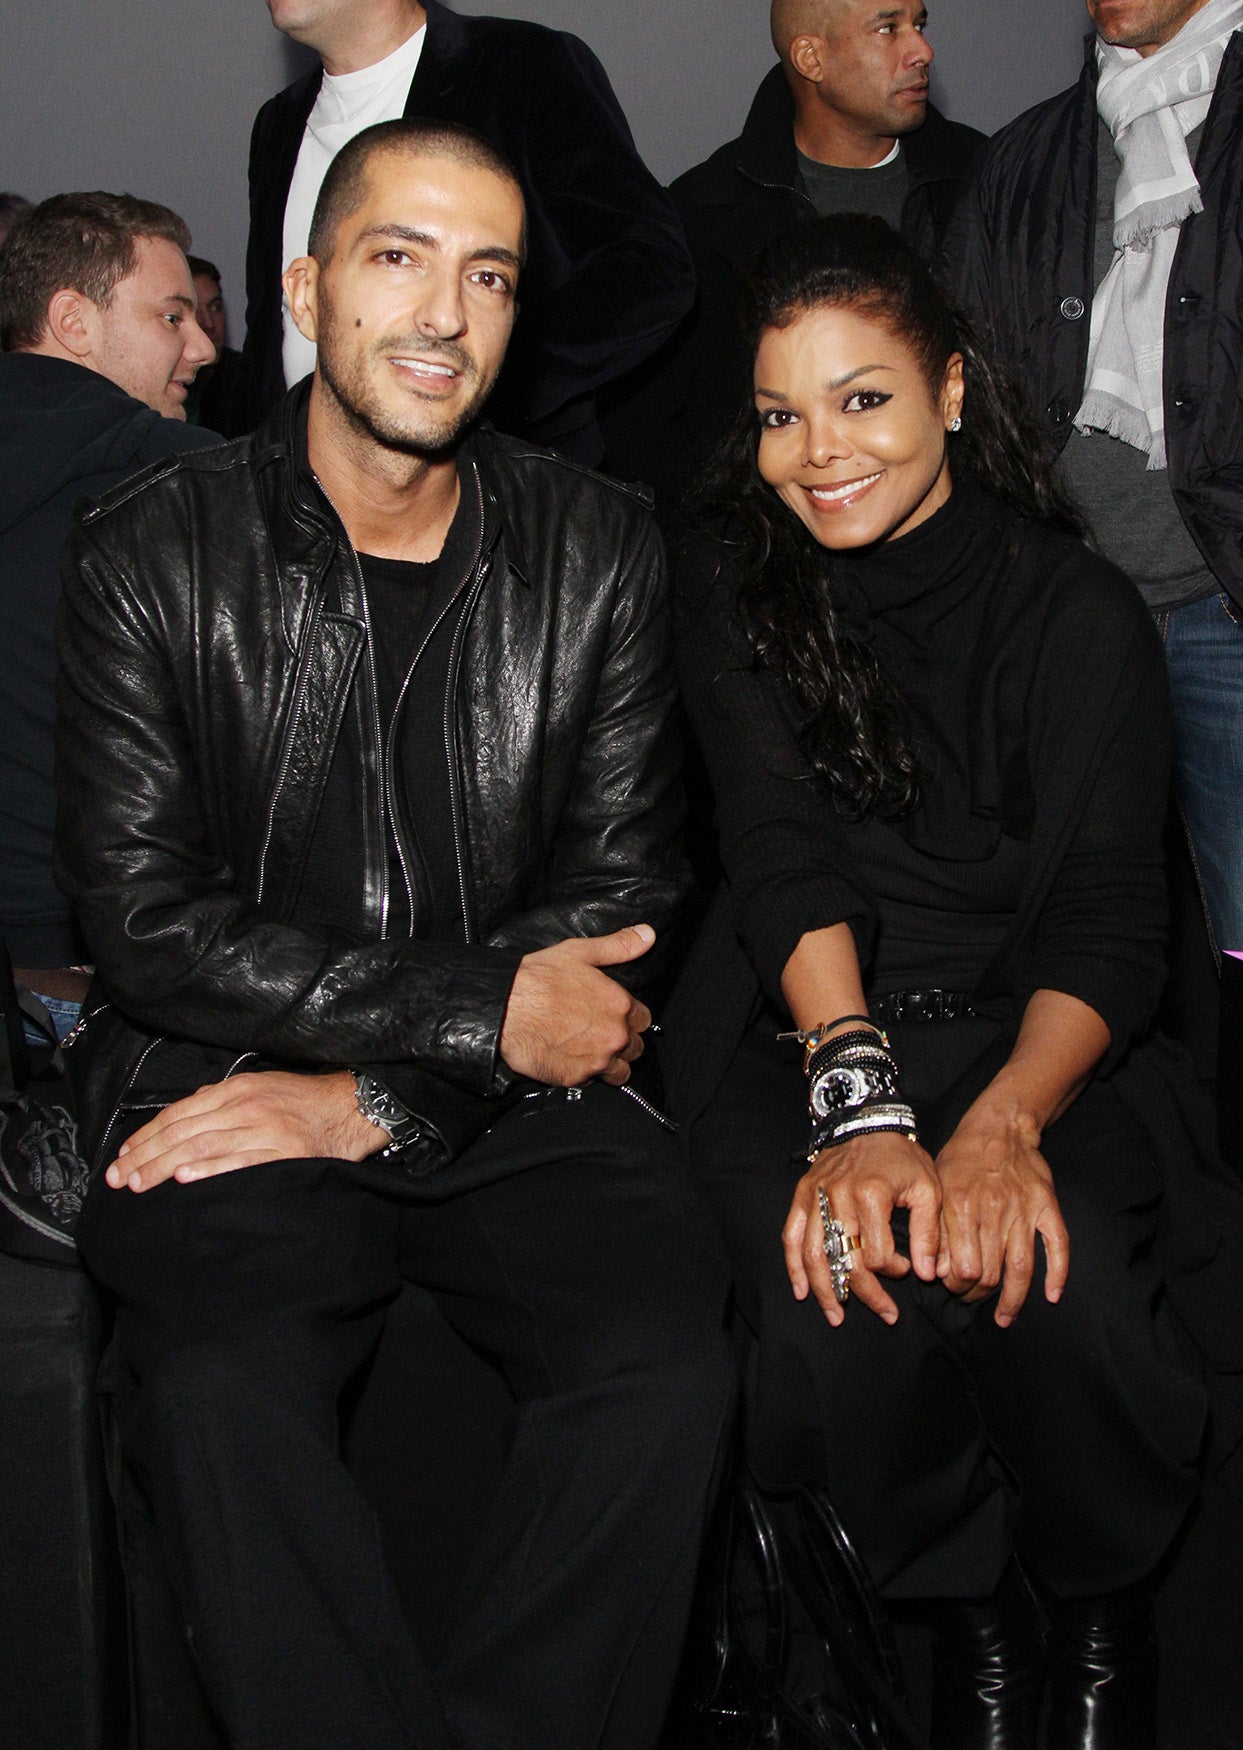 Janet Jackson And Wissam Al Mana: How Their Billion Dollar Interfaith Divorce Could Play Out When It Comes To Custody